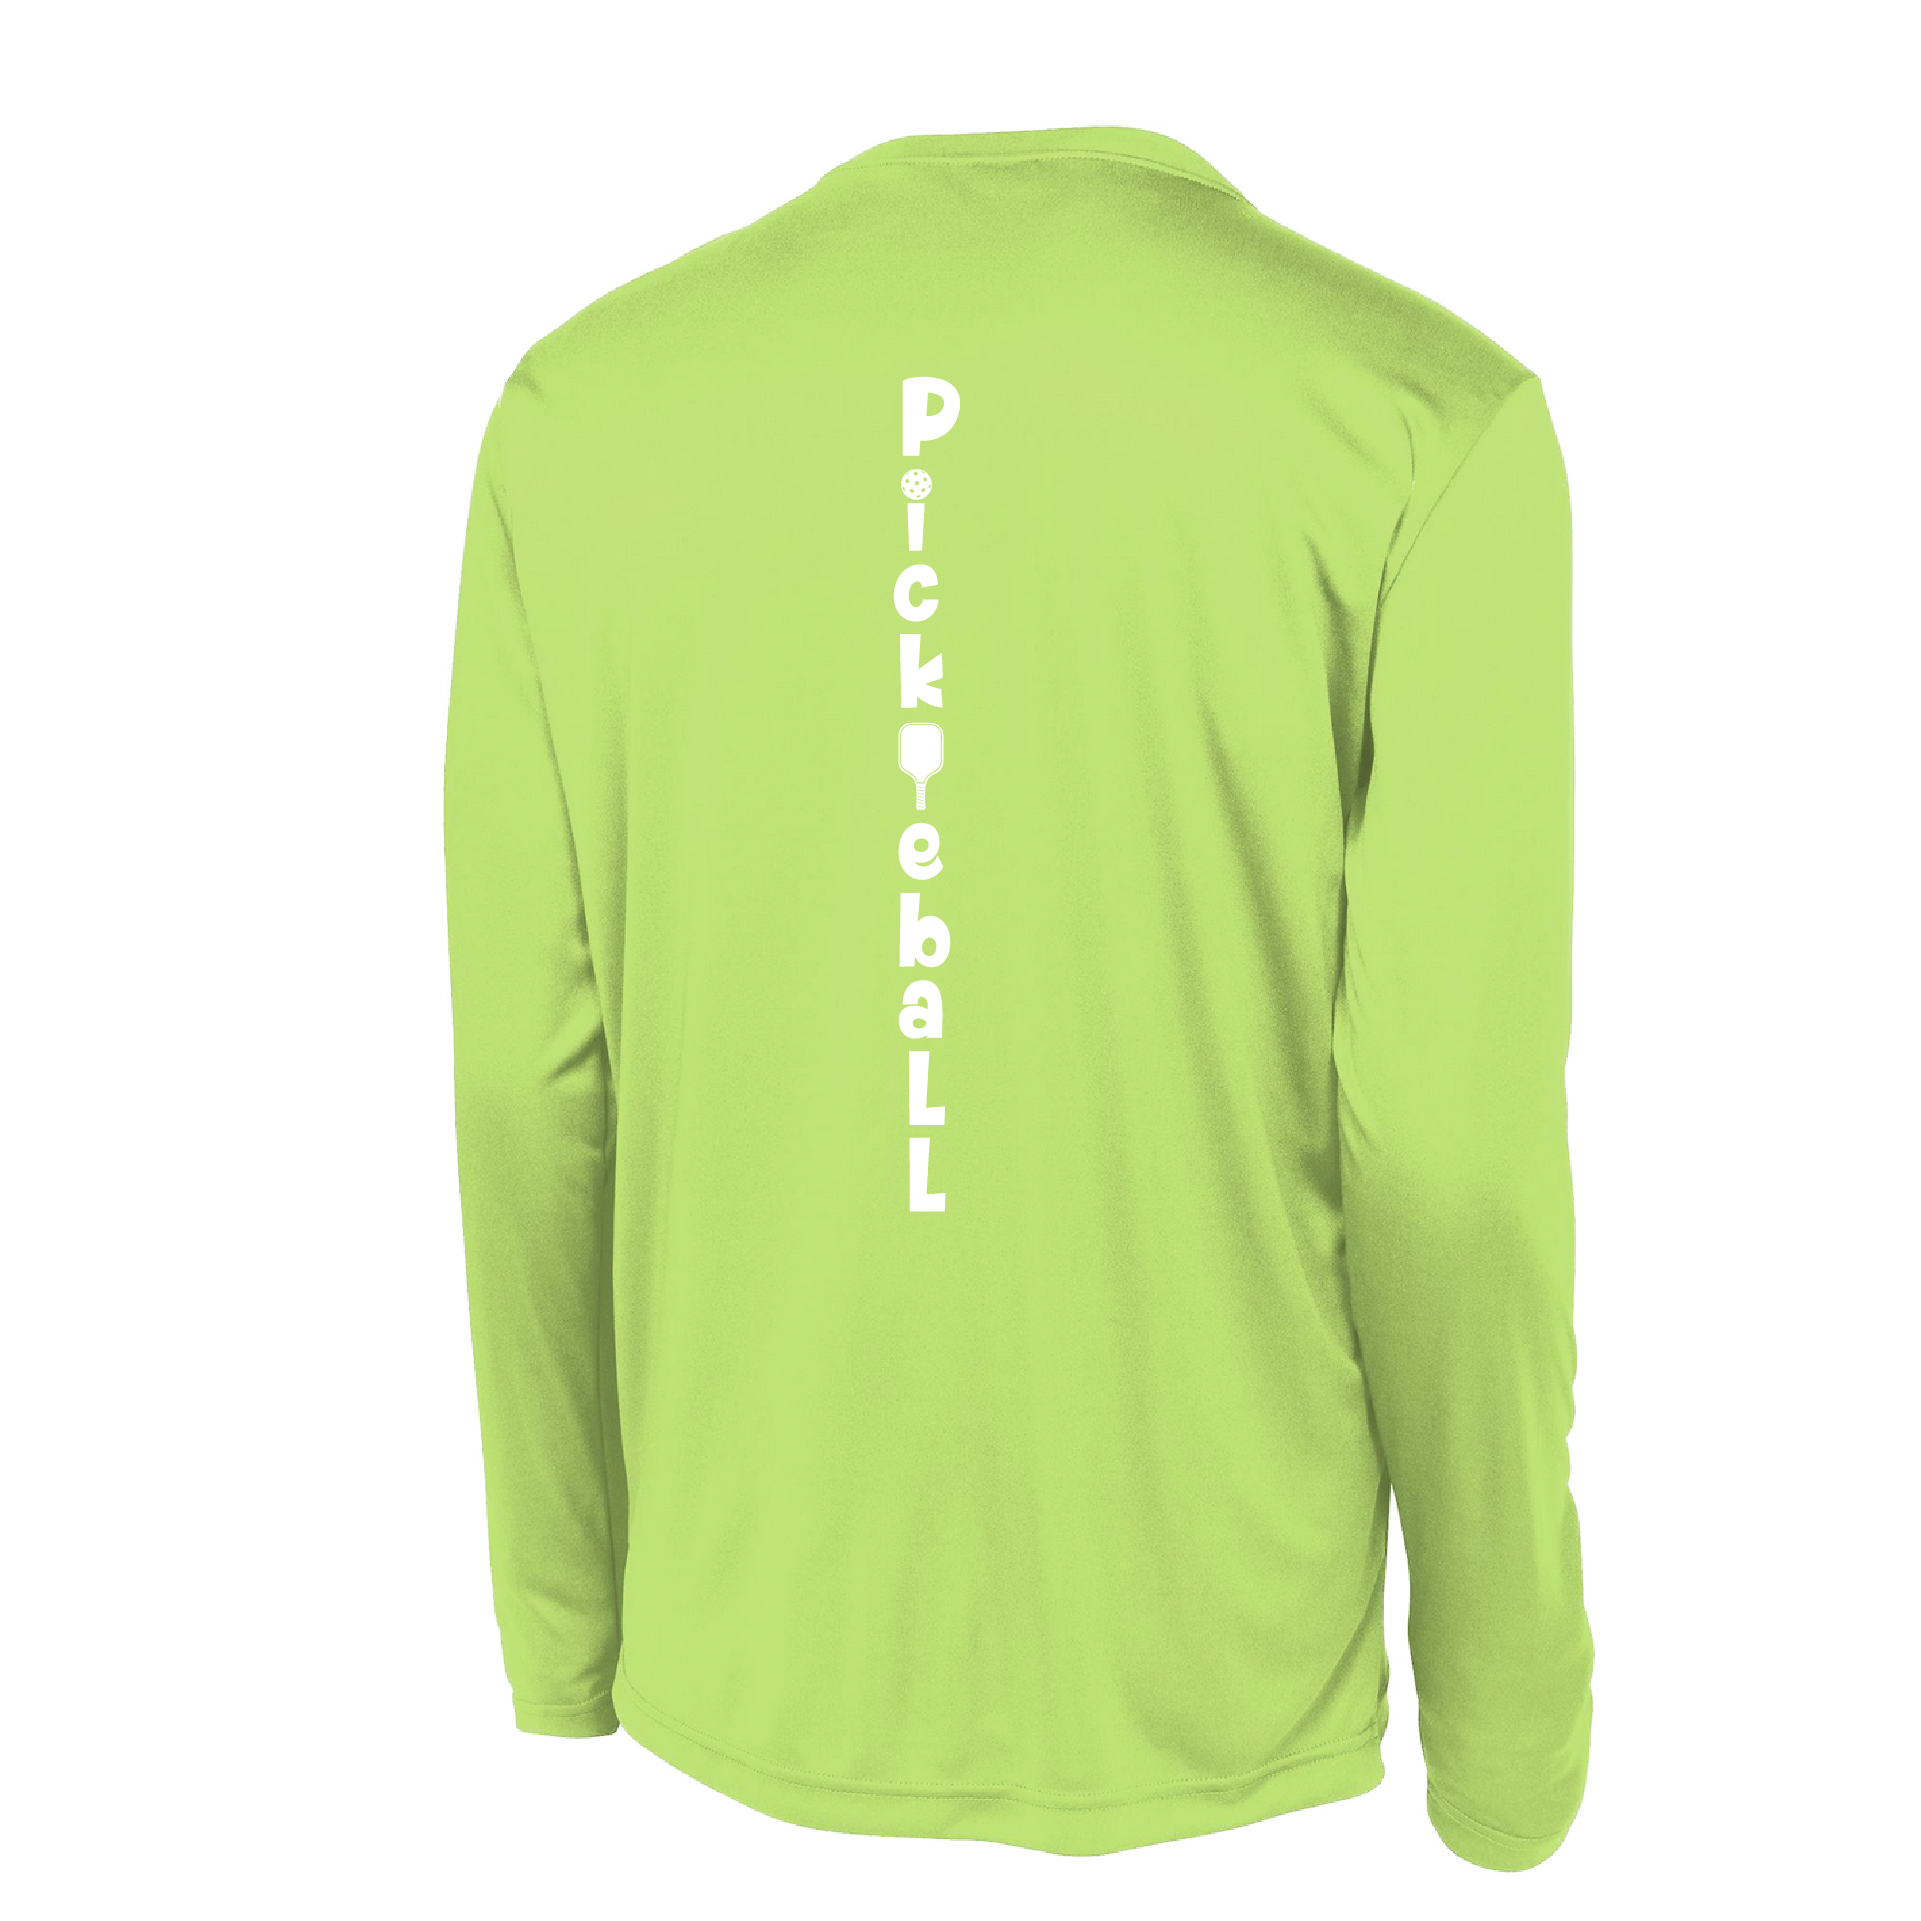 Pickleball Design: Pickleball Vertical Customizable Location  Men's Style: Long Sleeve (LS)  Shirts are lightweight, roomy and highly breathable. These moisture-wicking shirts are designed for athletic performance. They feature PosiCharge technology to lock in color and prevent logos from fading. Removable tag and set-in sleeves for comfort.